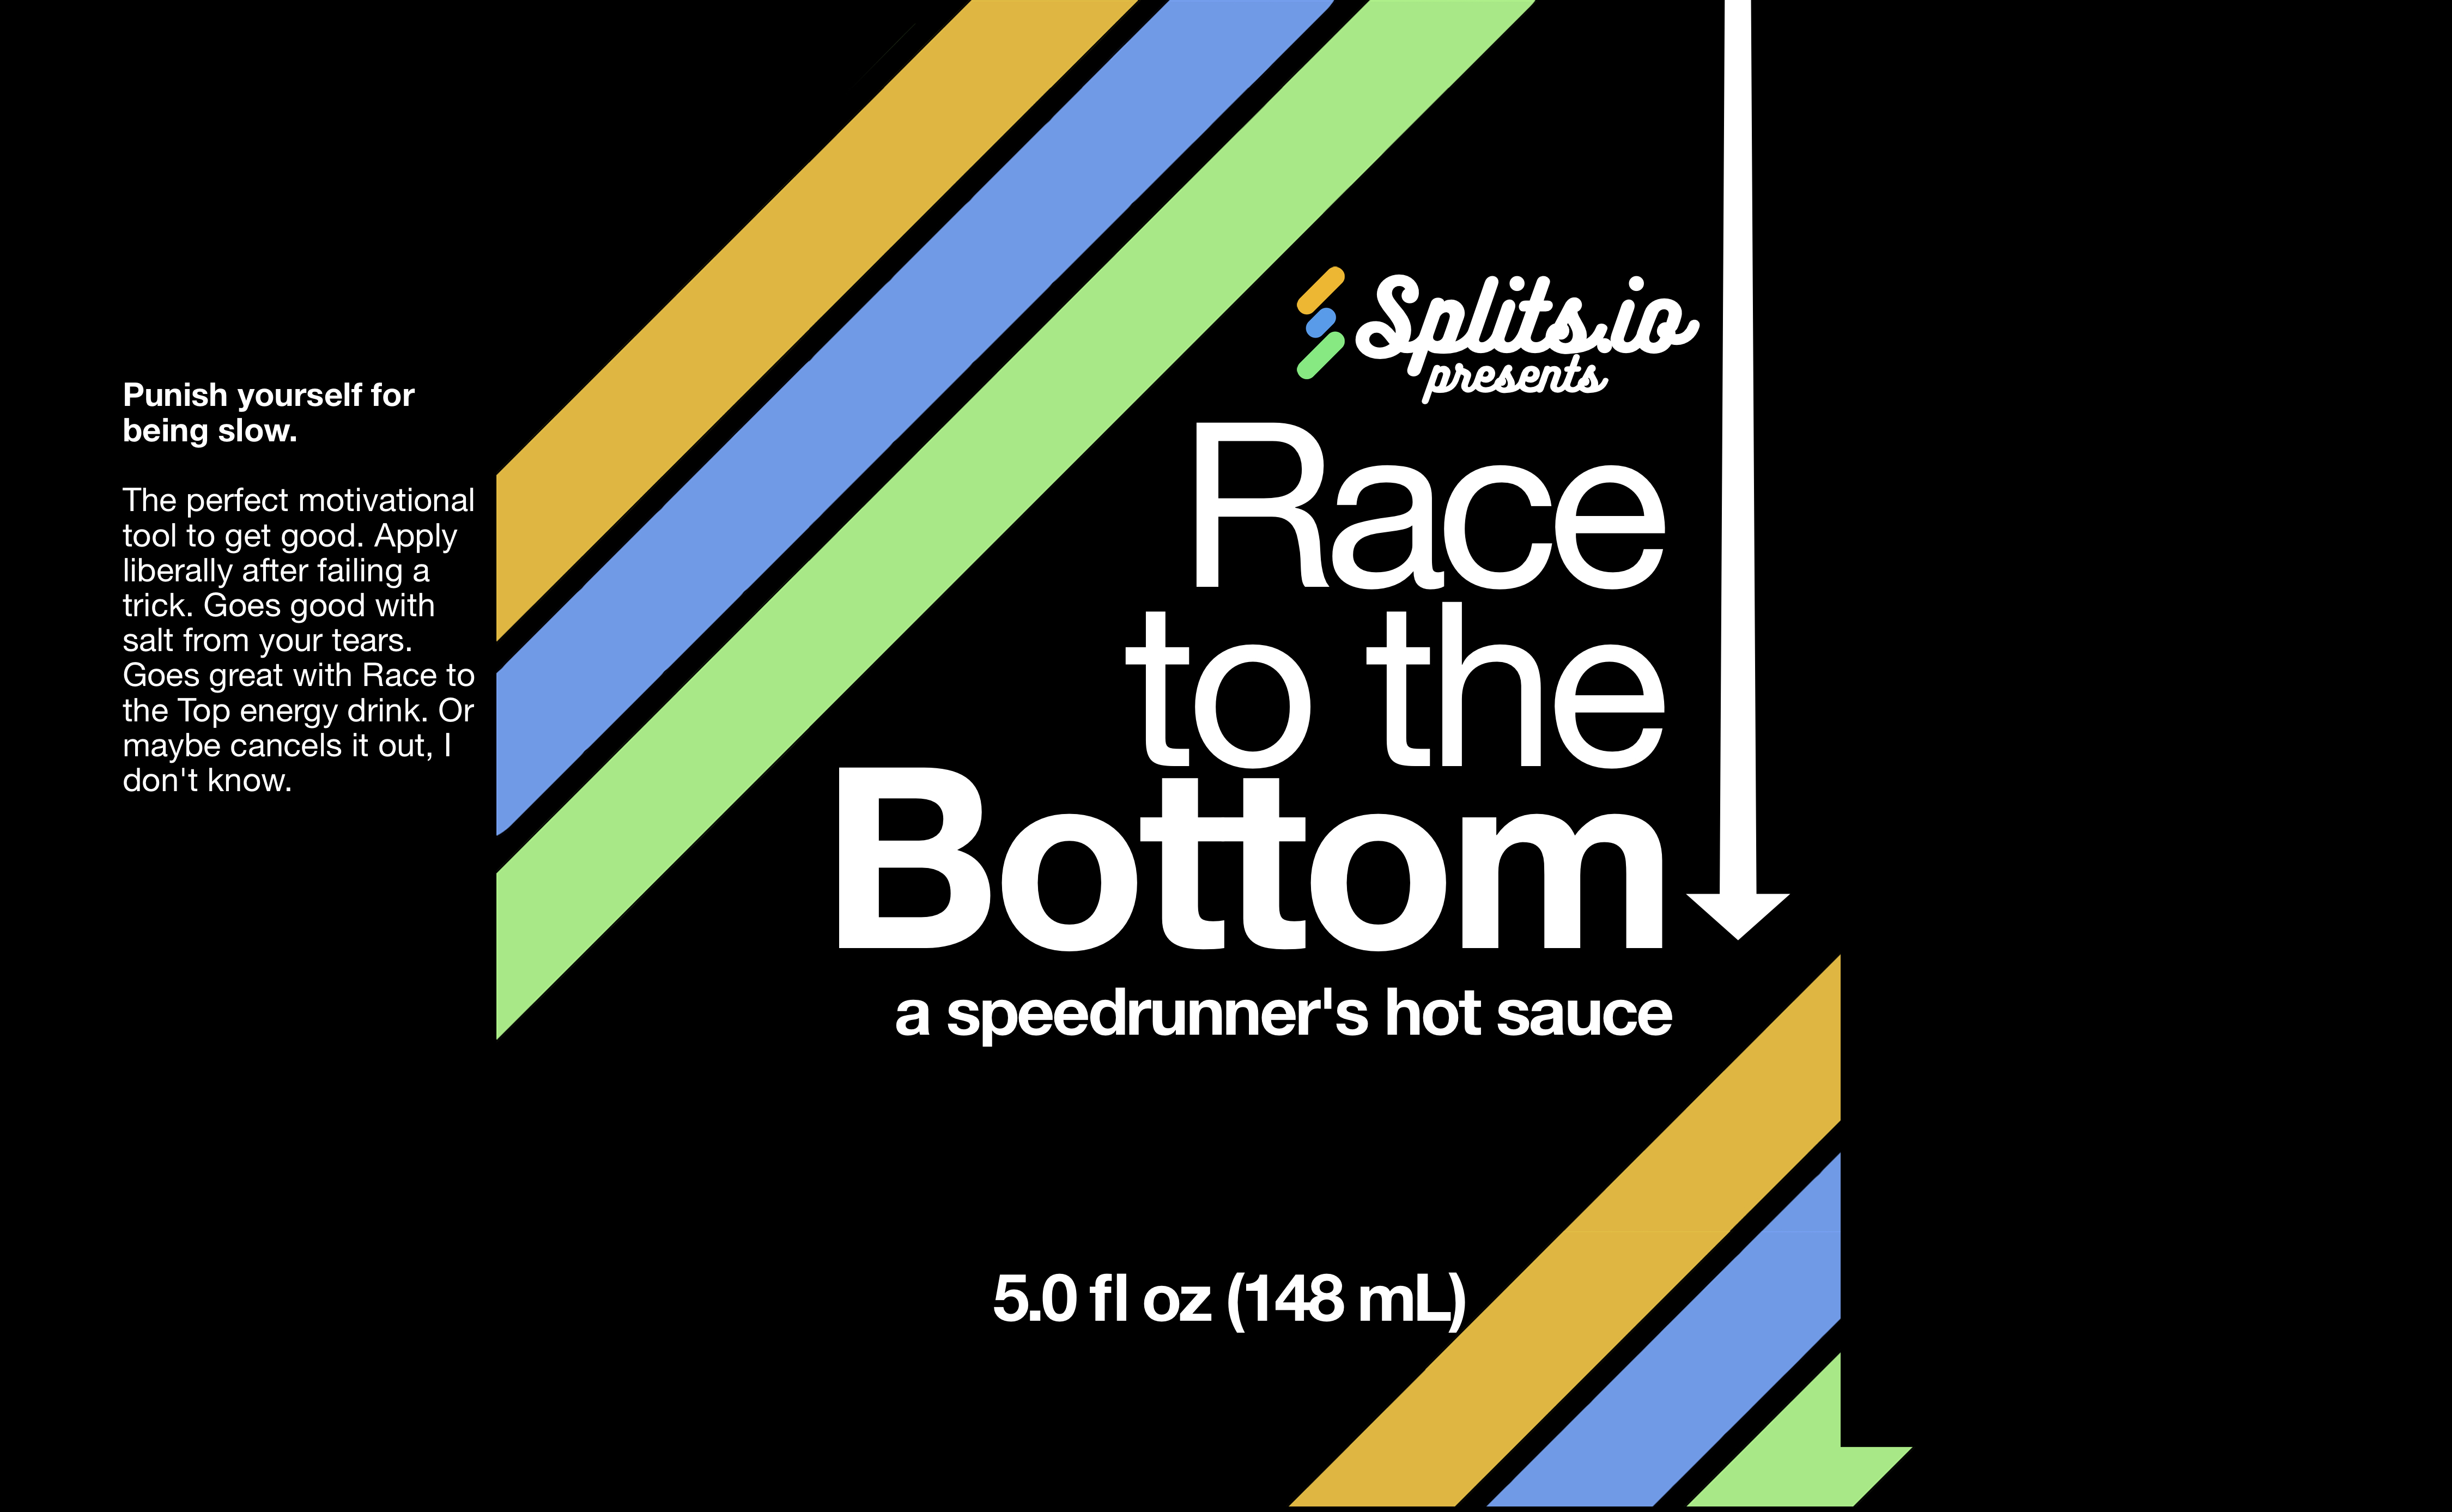 A hot sauce label reading 'Race to the bottom: A speedrunner's hot sauce' in the Splits.io colors.